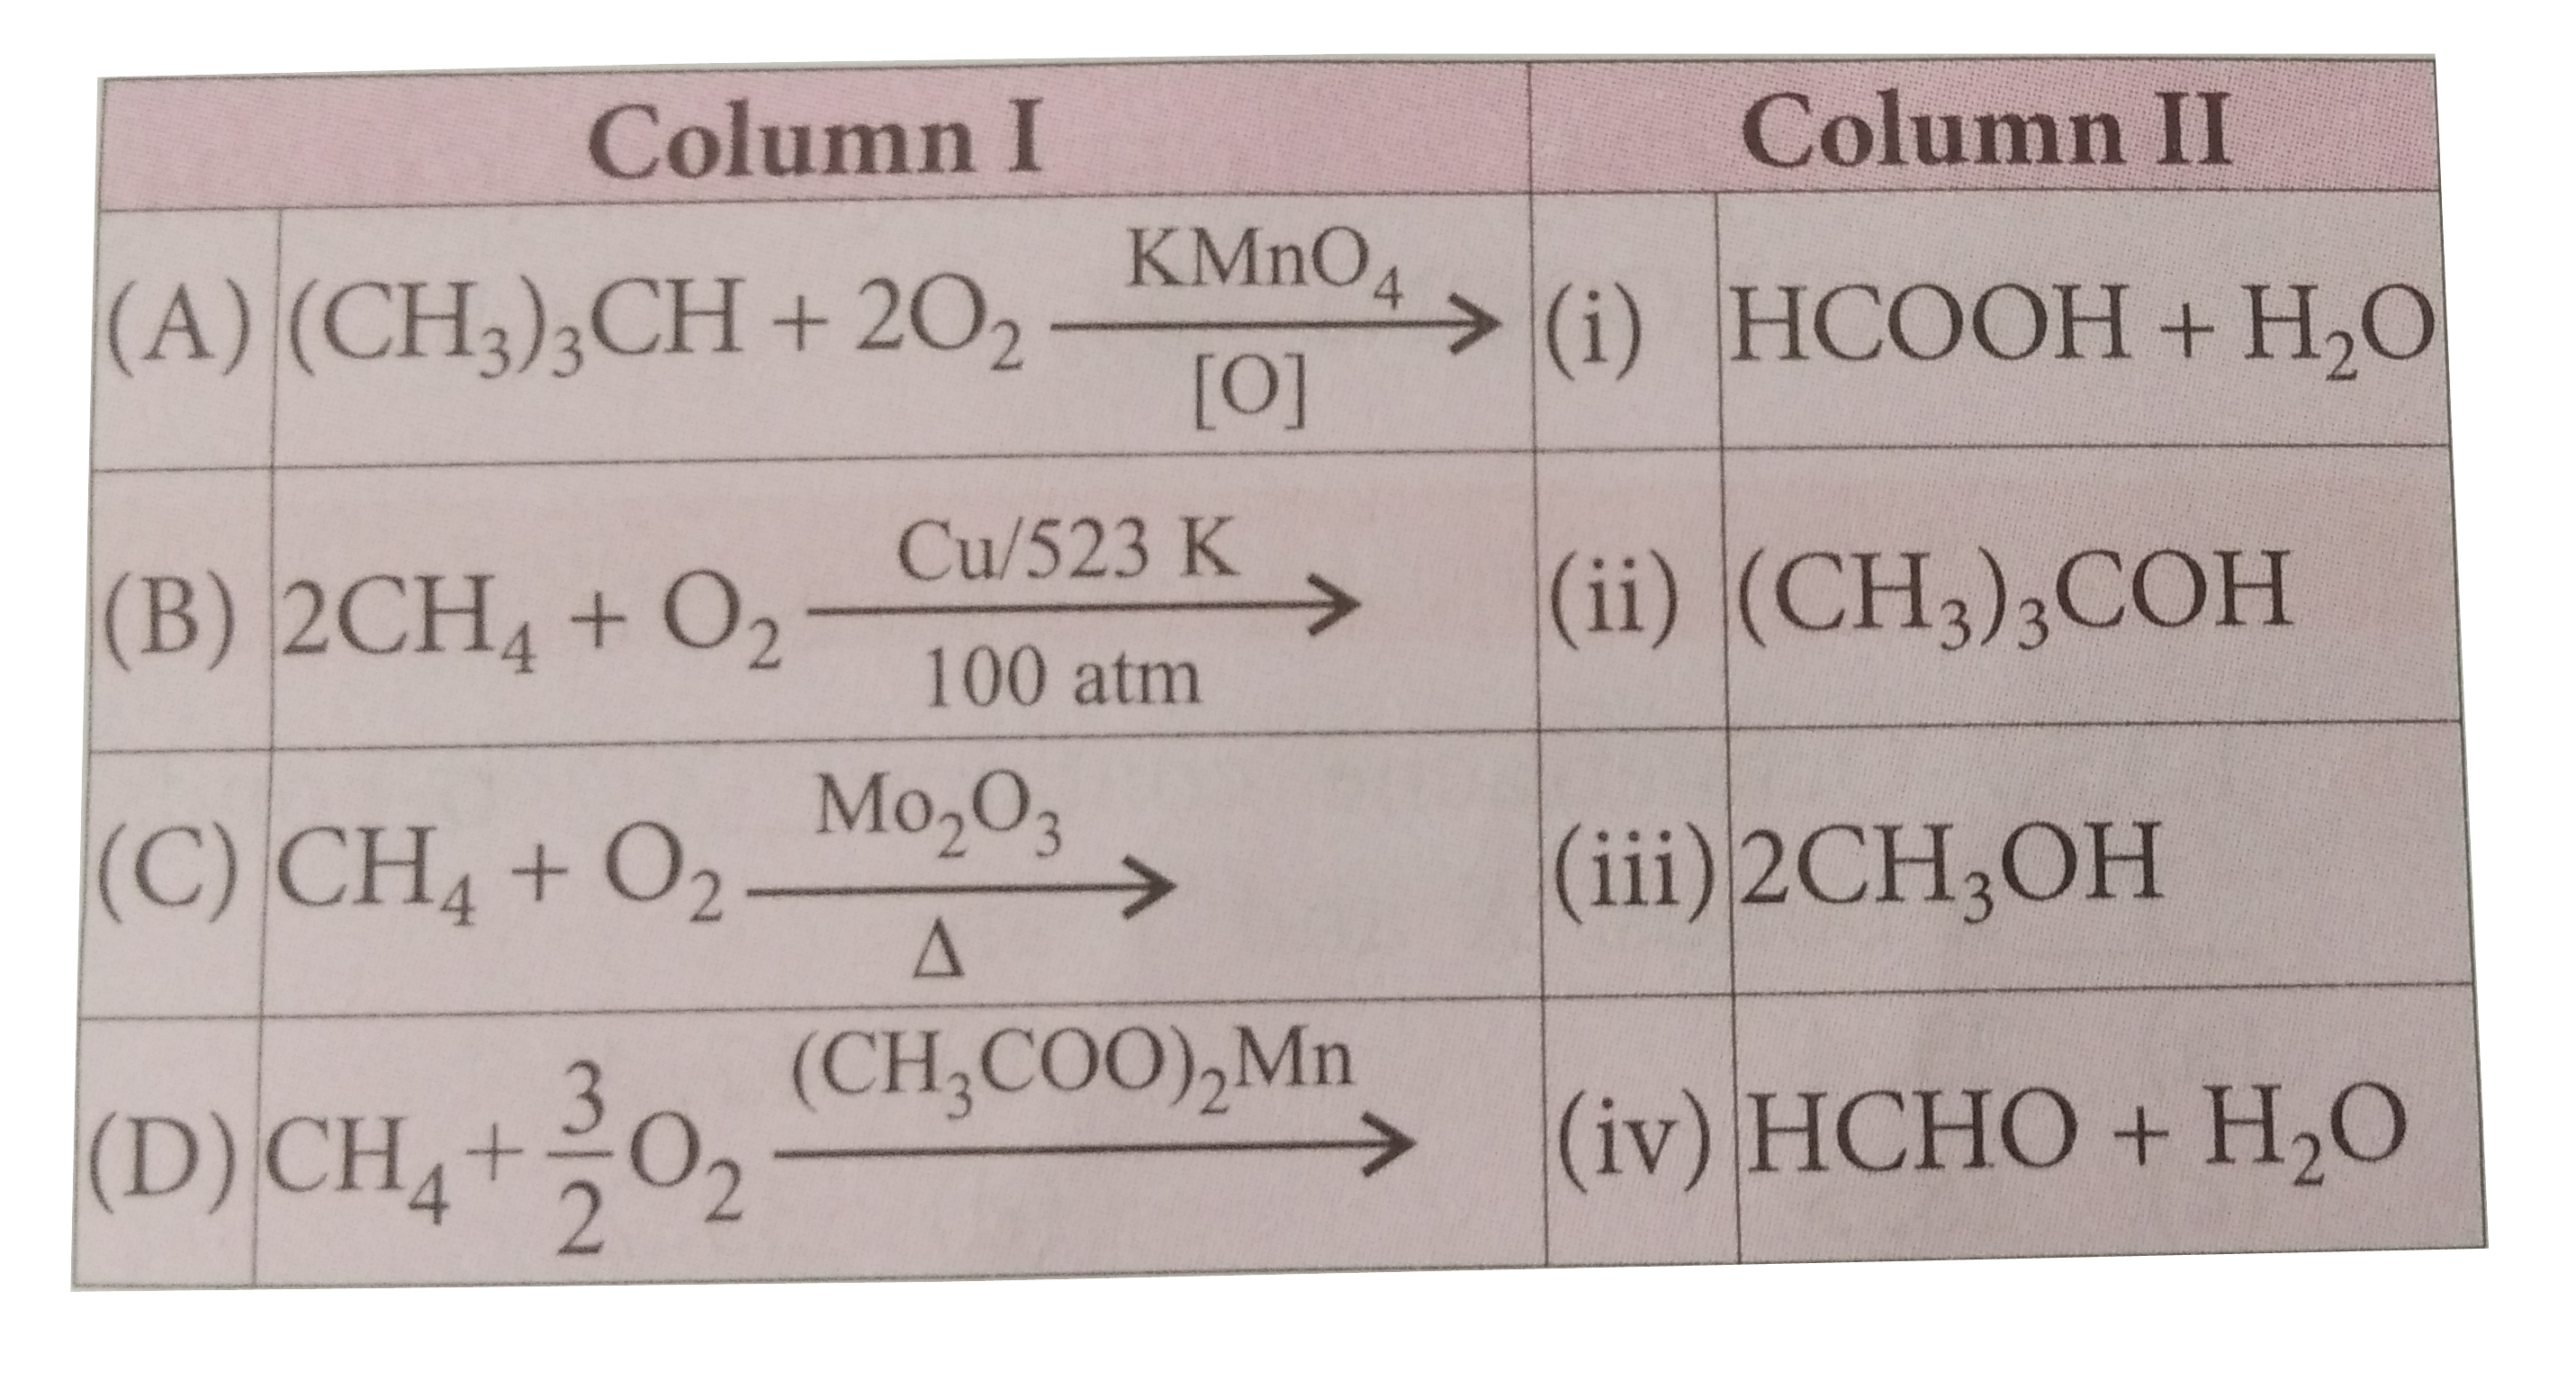 Match the column I with column II to identify the products of oxidation of alkanes and mark the appropriate choice.